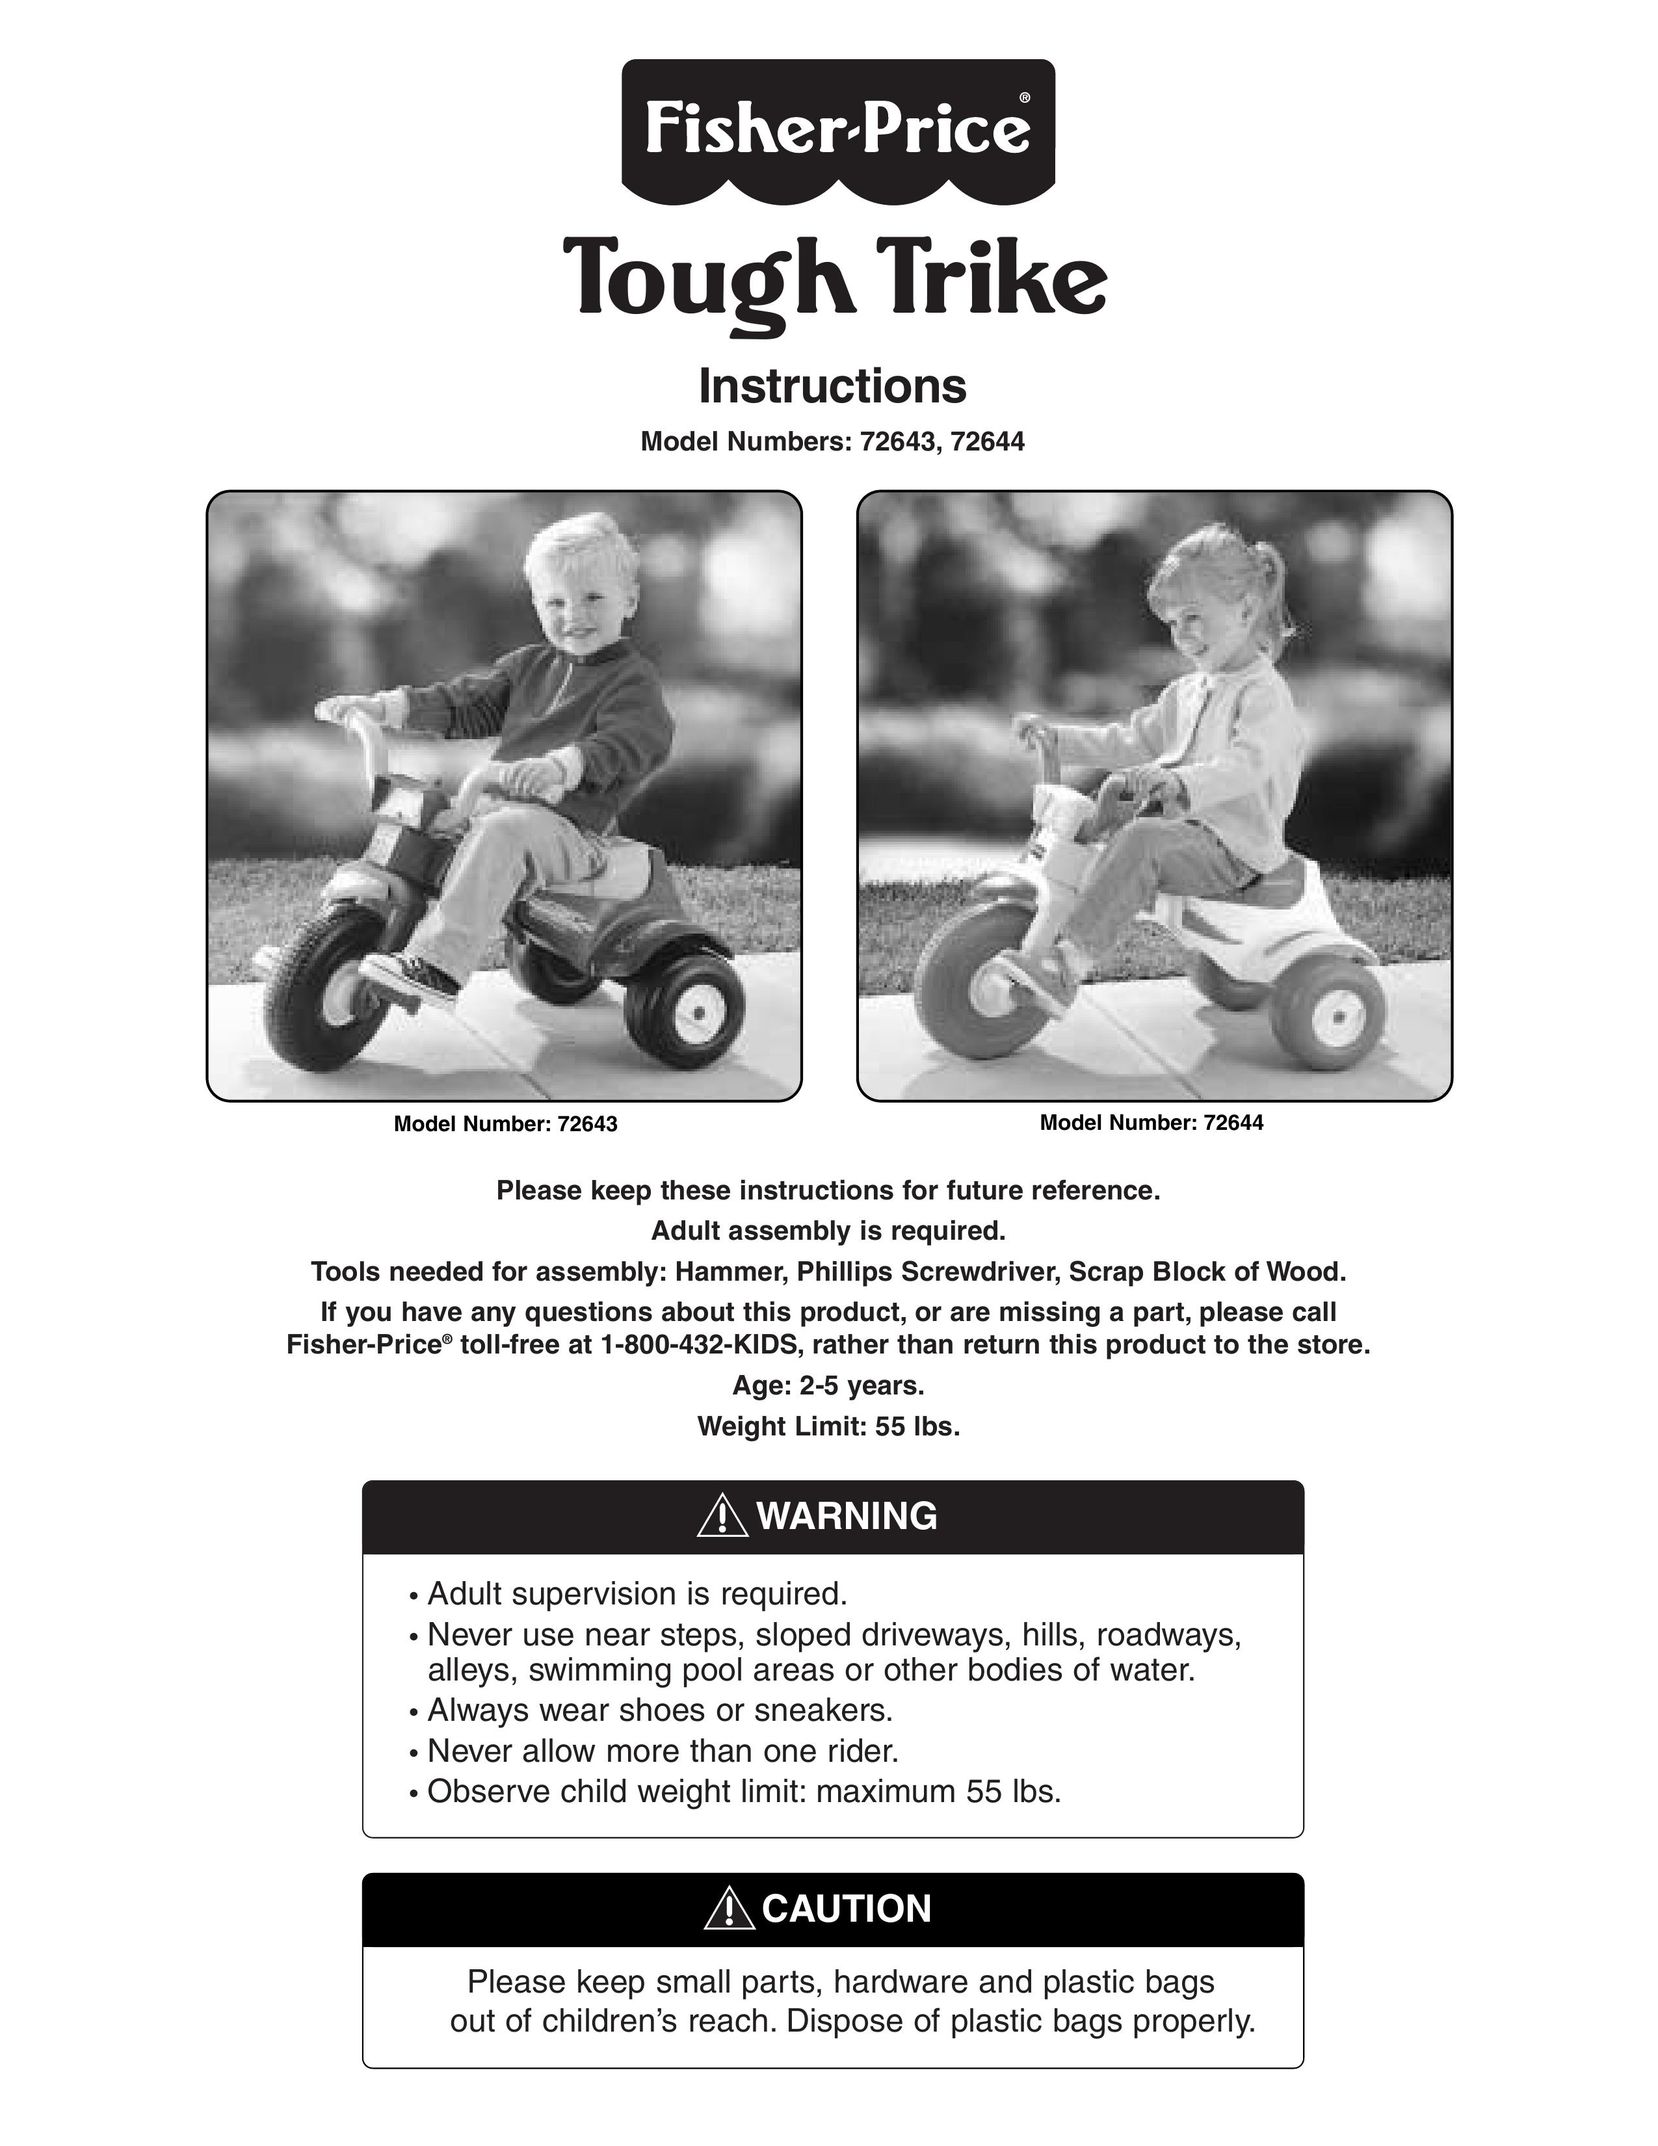 Fisher-Price 72644 Riding Toy User Manual